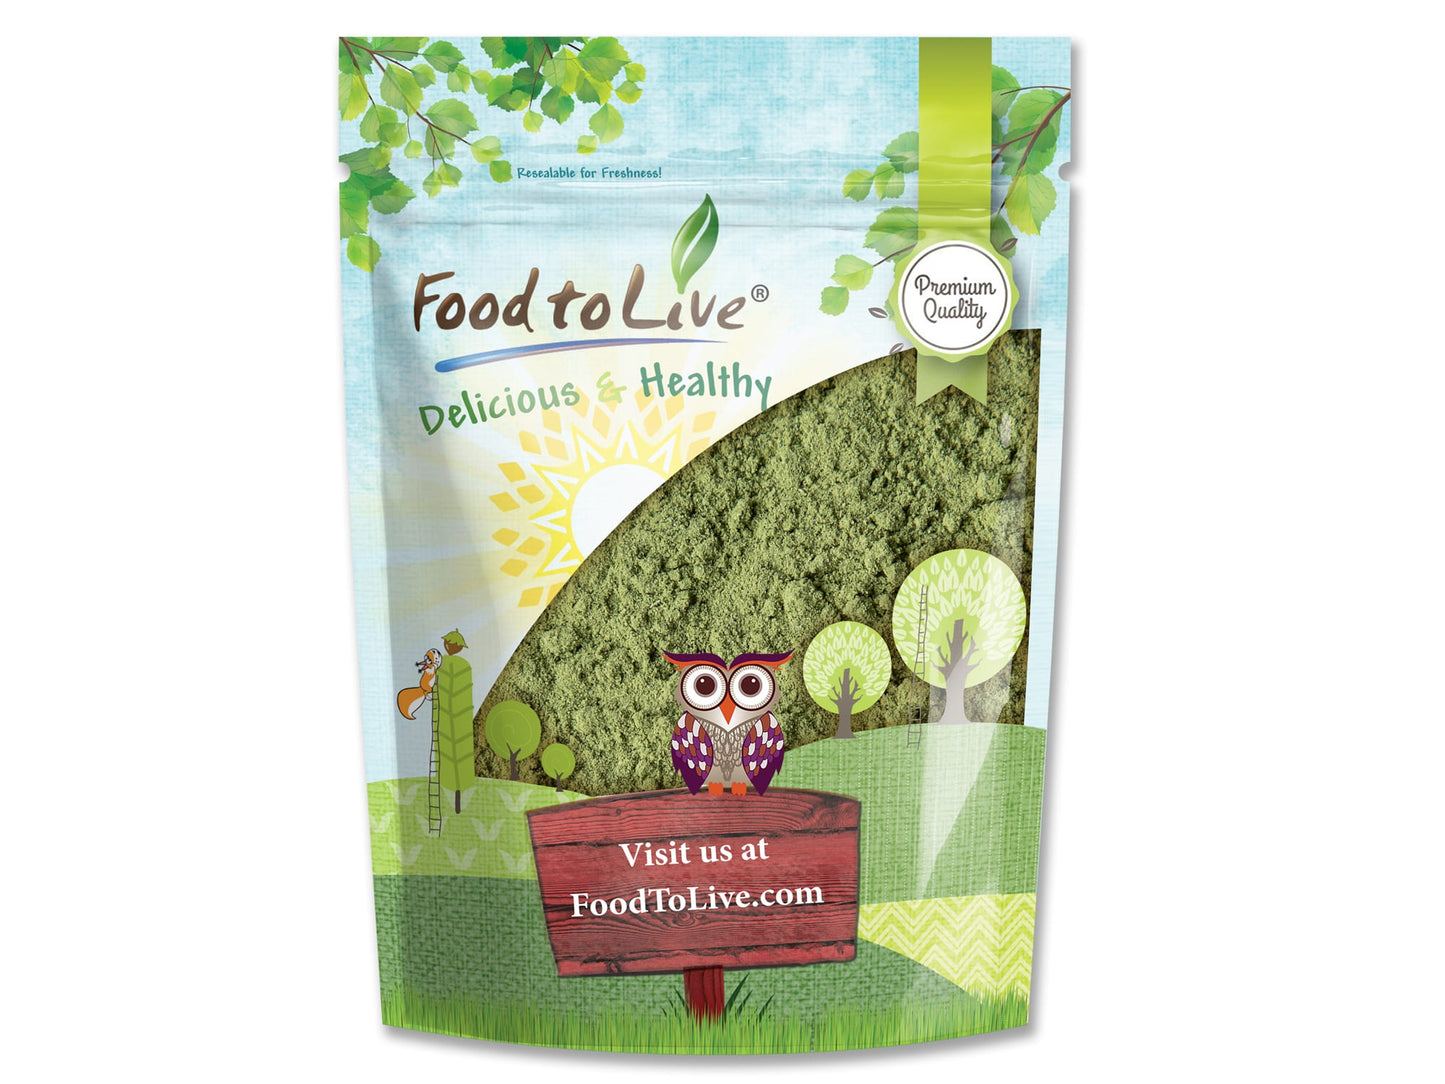 Alfalfa Powder - Made from Raw Dried Whole Young Leaves, Vegan, Bulk, Great for Baking, Juices, Smoothies, Shakes, Теа, and Instant Breakfast Drinks. Good Source of Dietary Fiber and Protein